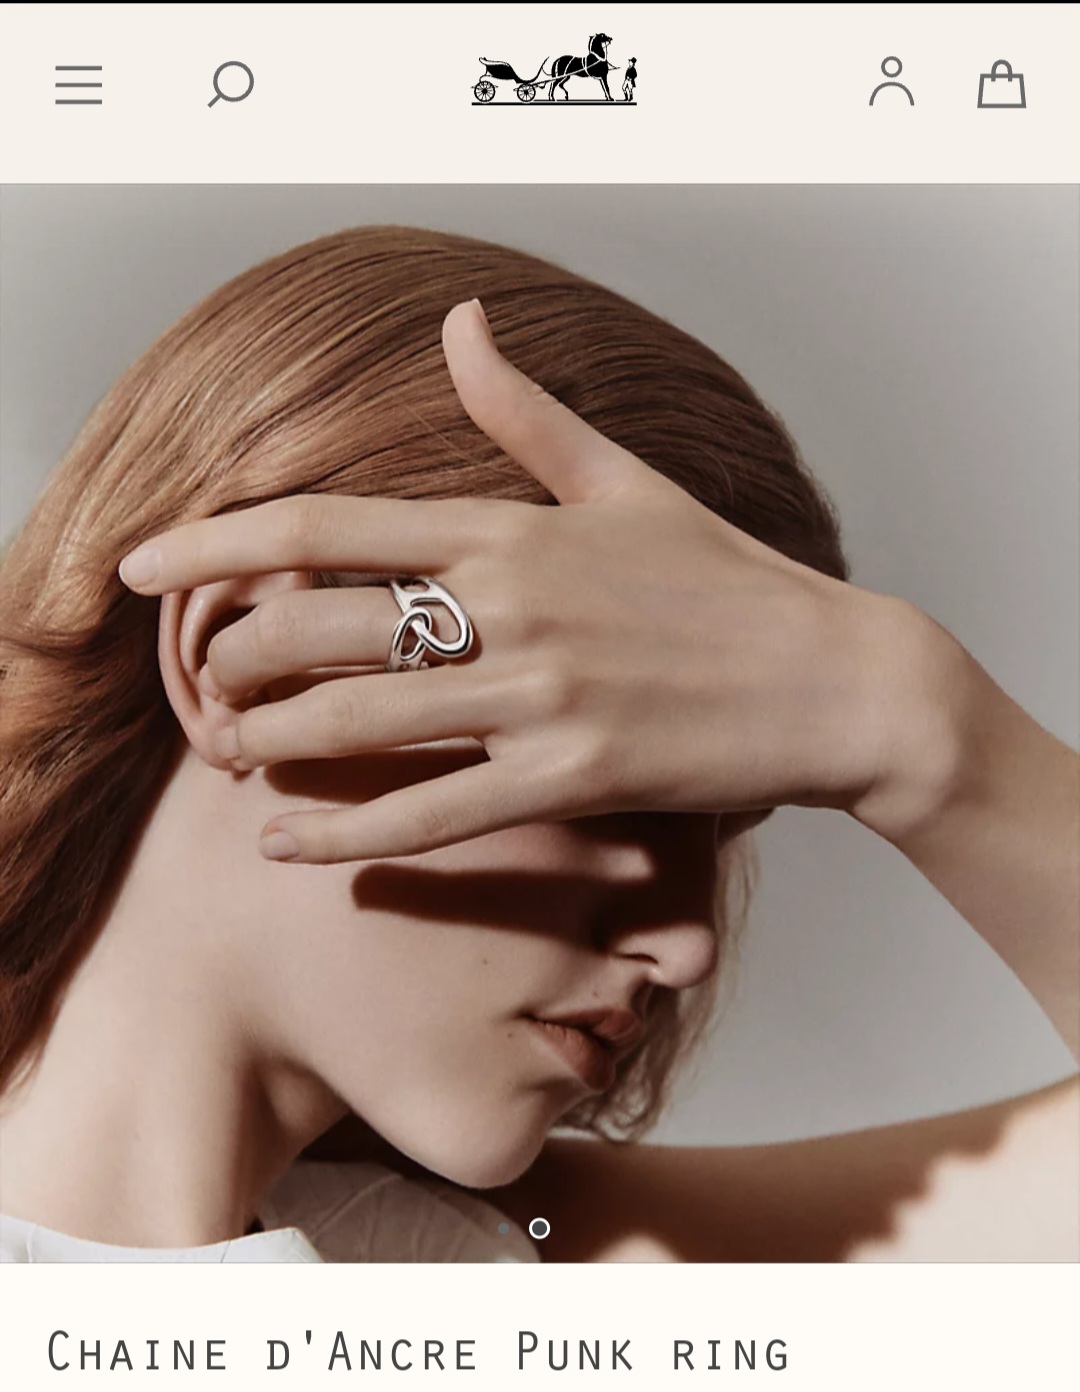 Hermes Chaine d’Ancre Punk ring